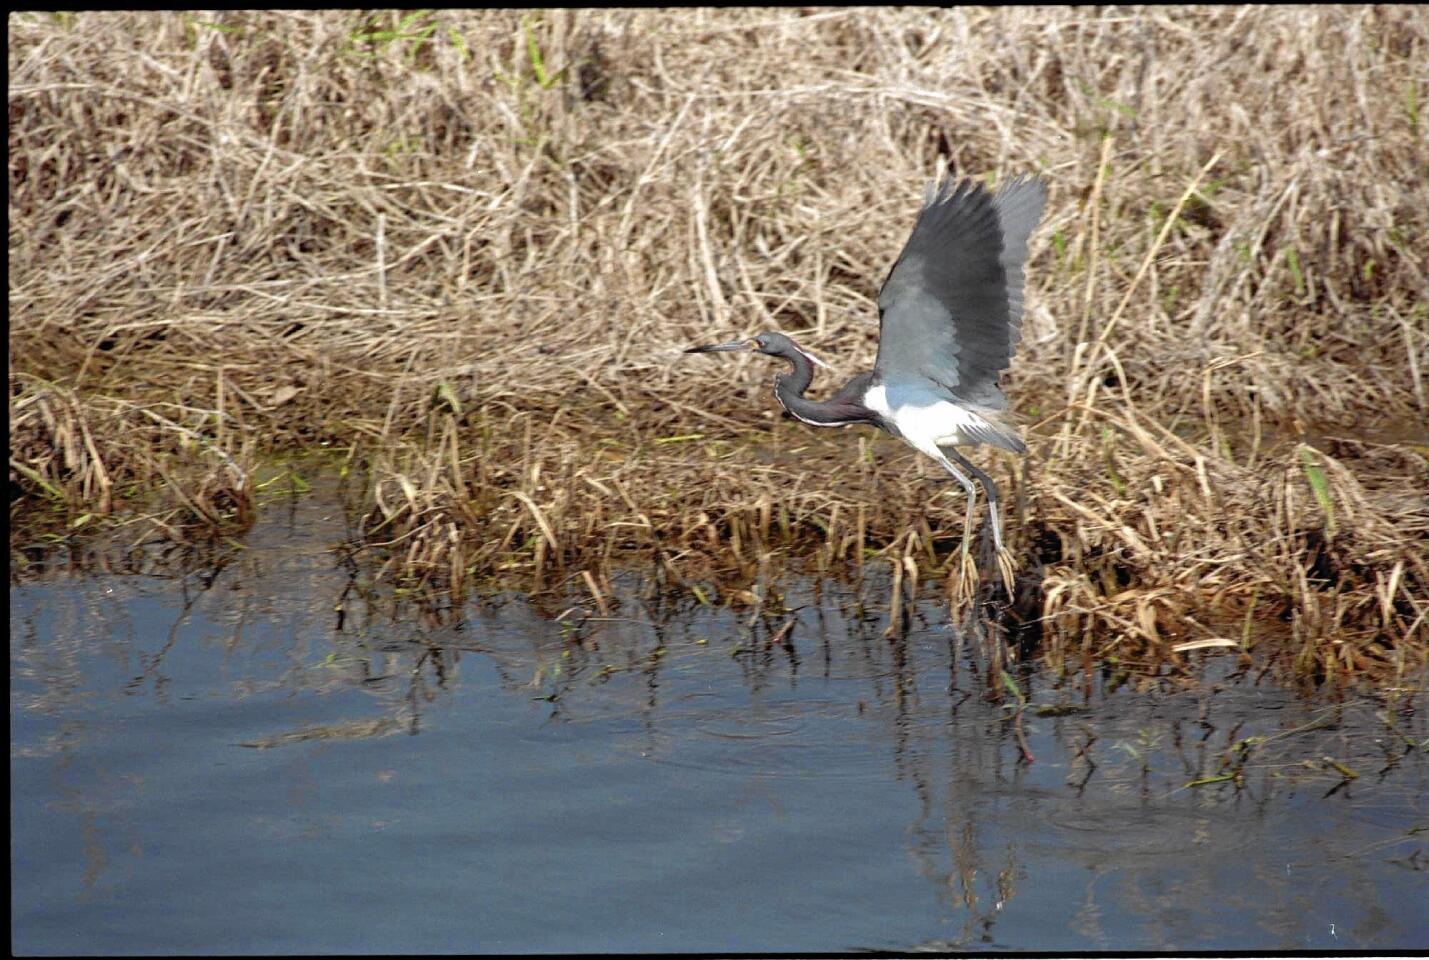 (1 of 3) Lake Lotus Park. A large wading bird takes wing from the marshy lake shore. ORG XMIT: 972370